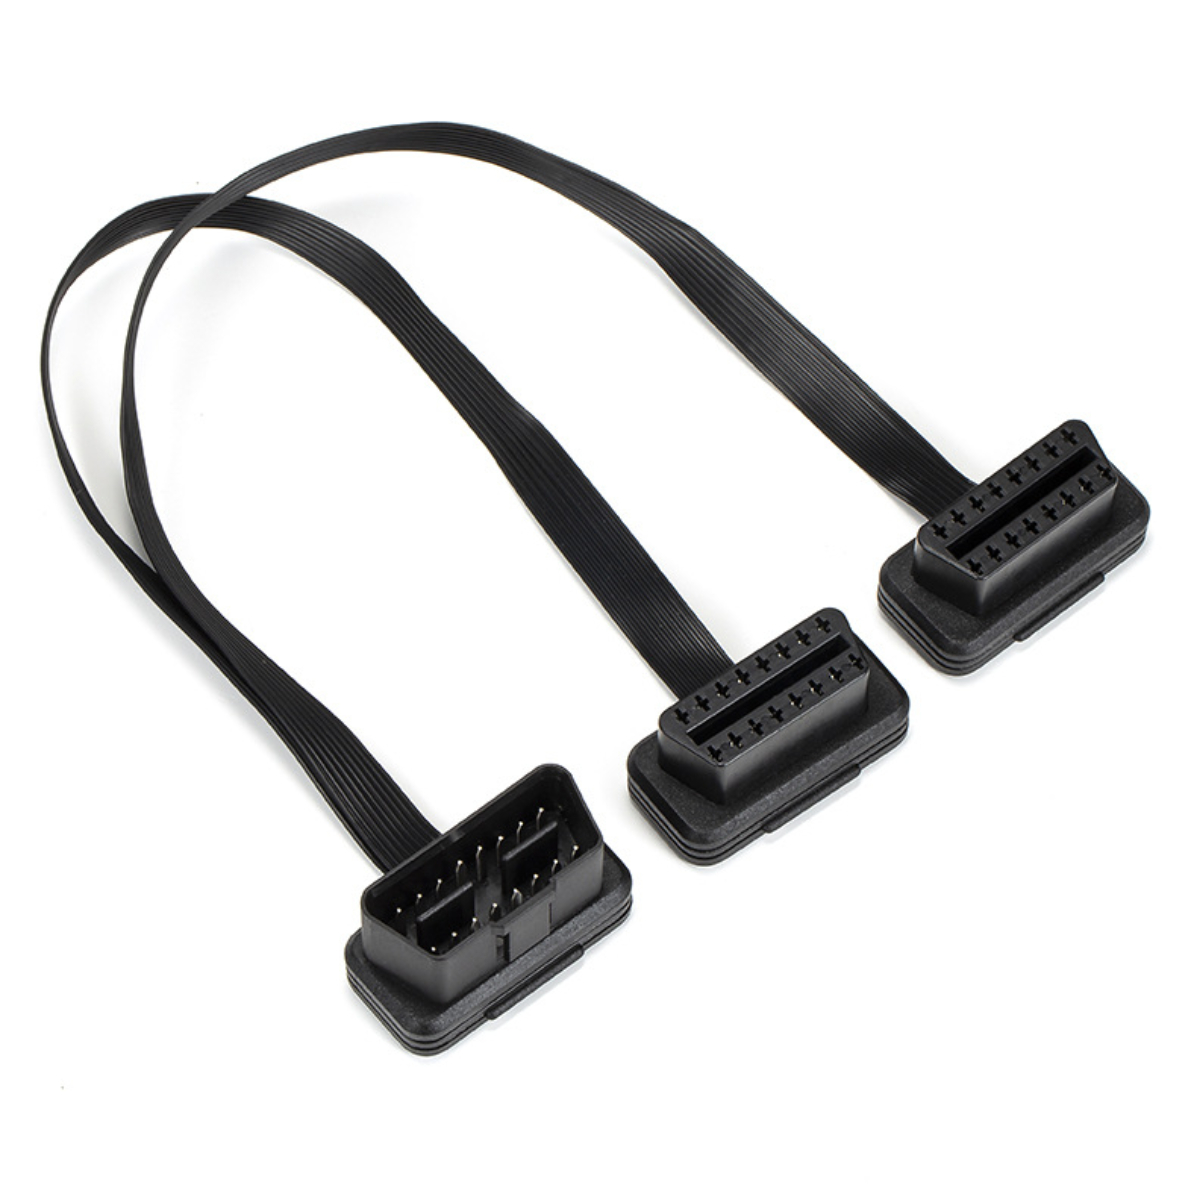 Buy OBD 2 OBD II 16 Pin Car Male to Female Extension Cable Diagnostic  Extender - 5 Meter